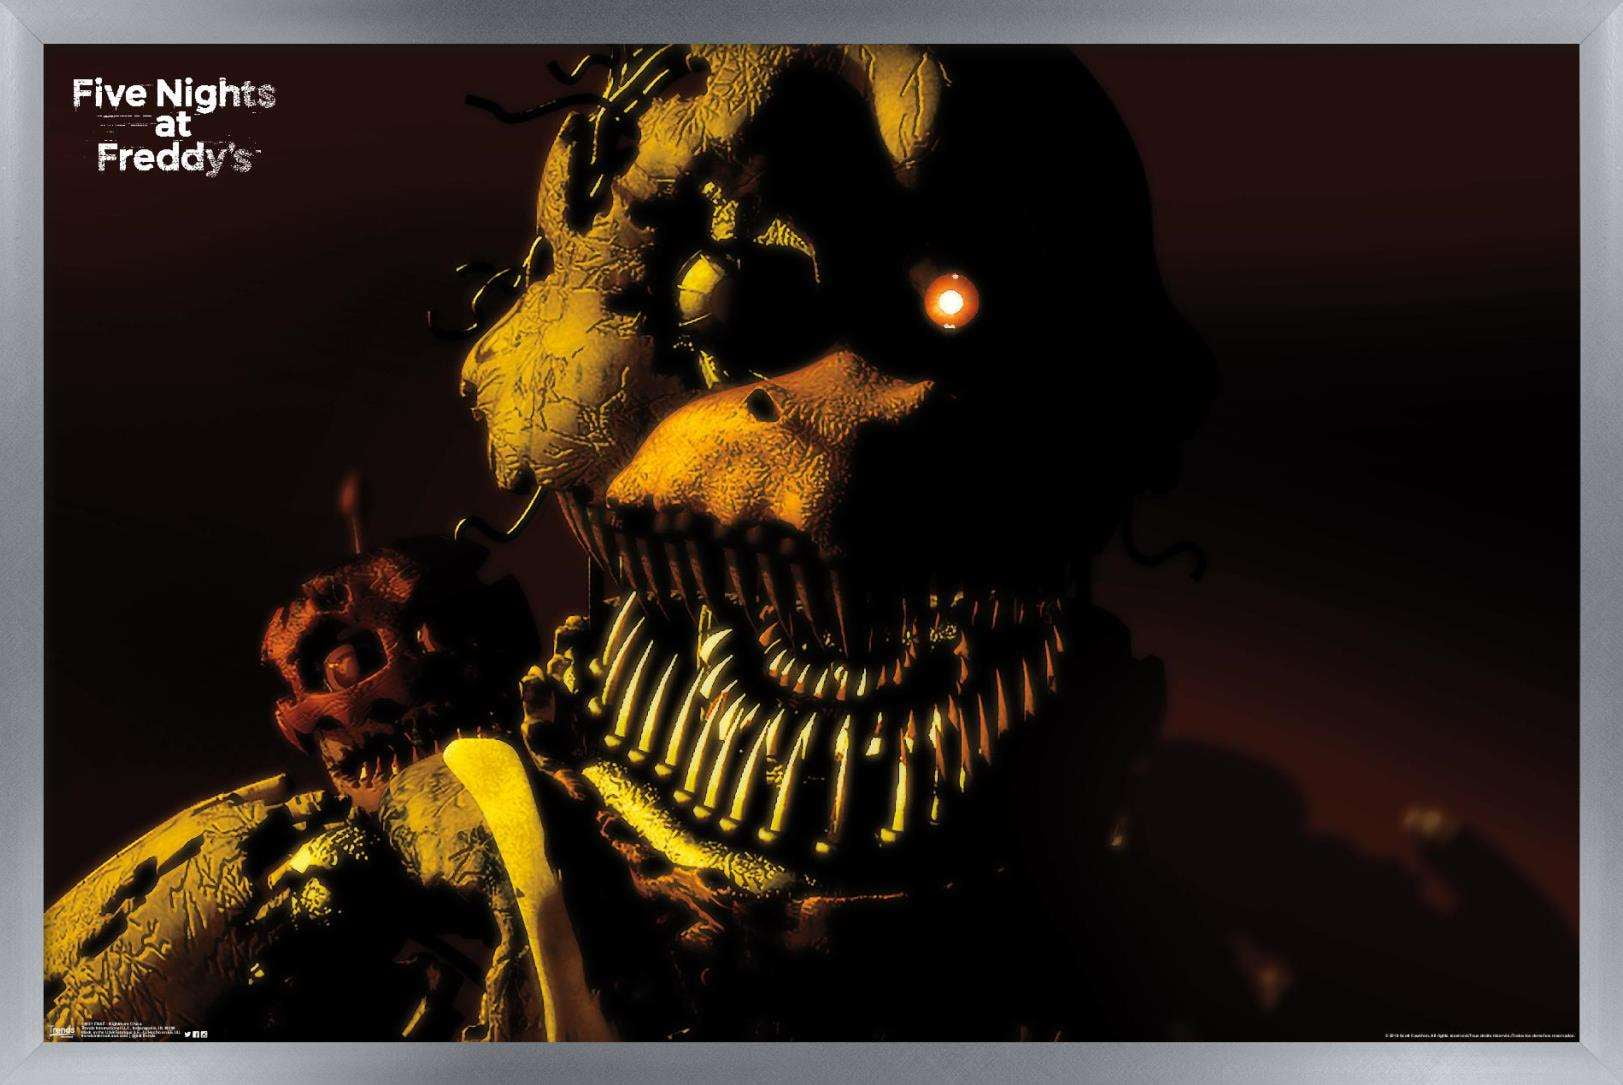 Five Nights at Freddy's - Nightmare Chica Wall Poster, 14.725 x